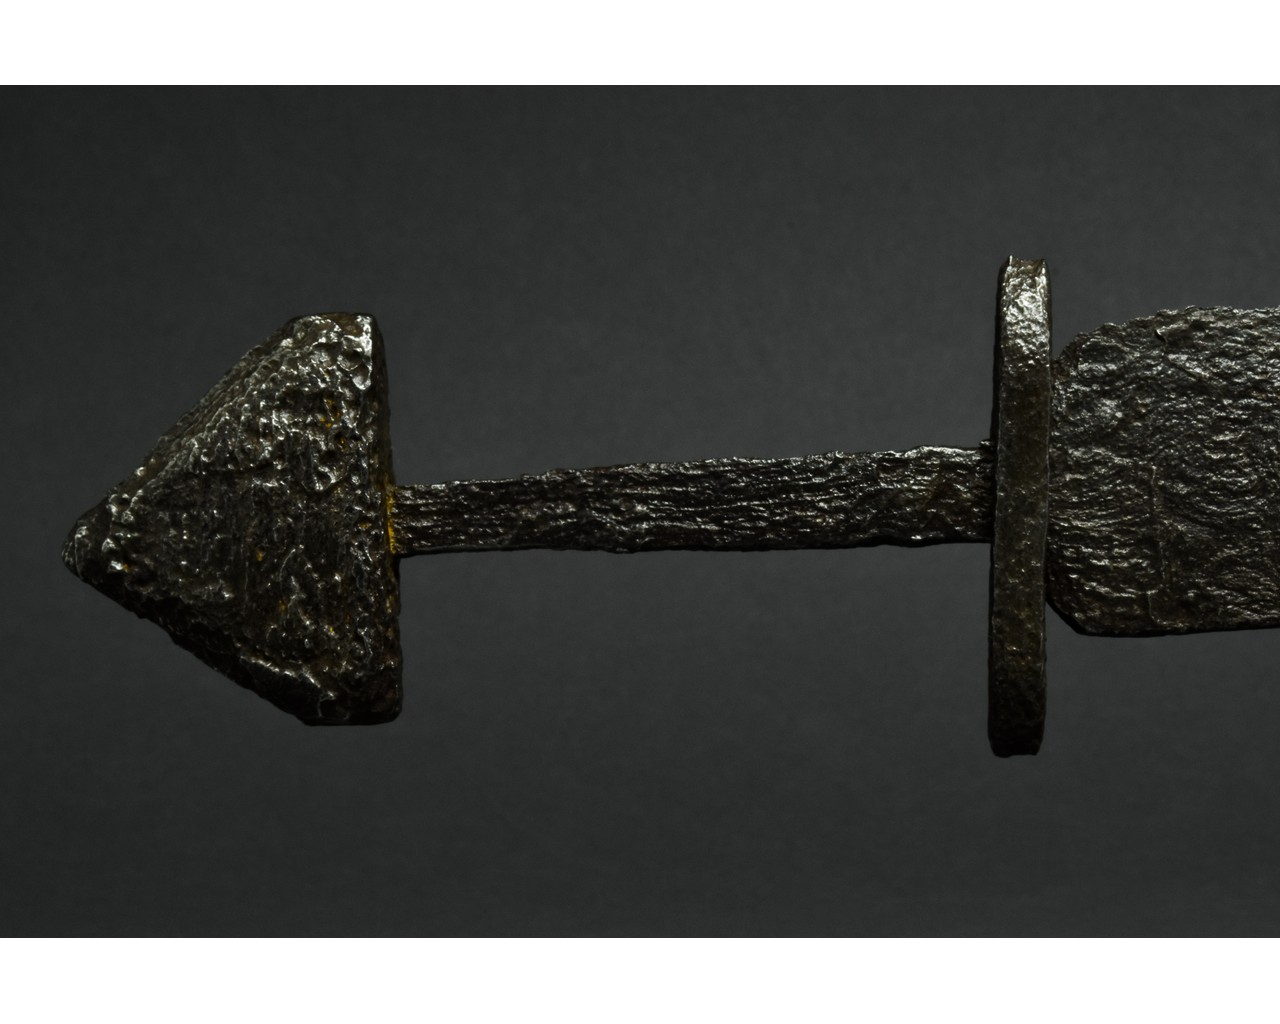 VIKING SINGLE-EDGED SWORD WITH INLAID AND HANDLE - Image 4 of 8